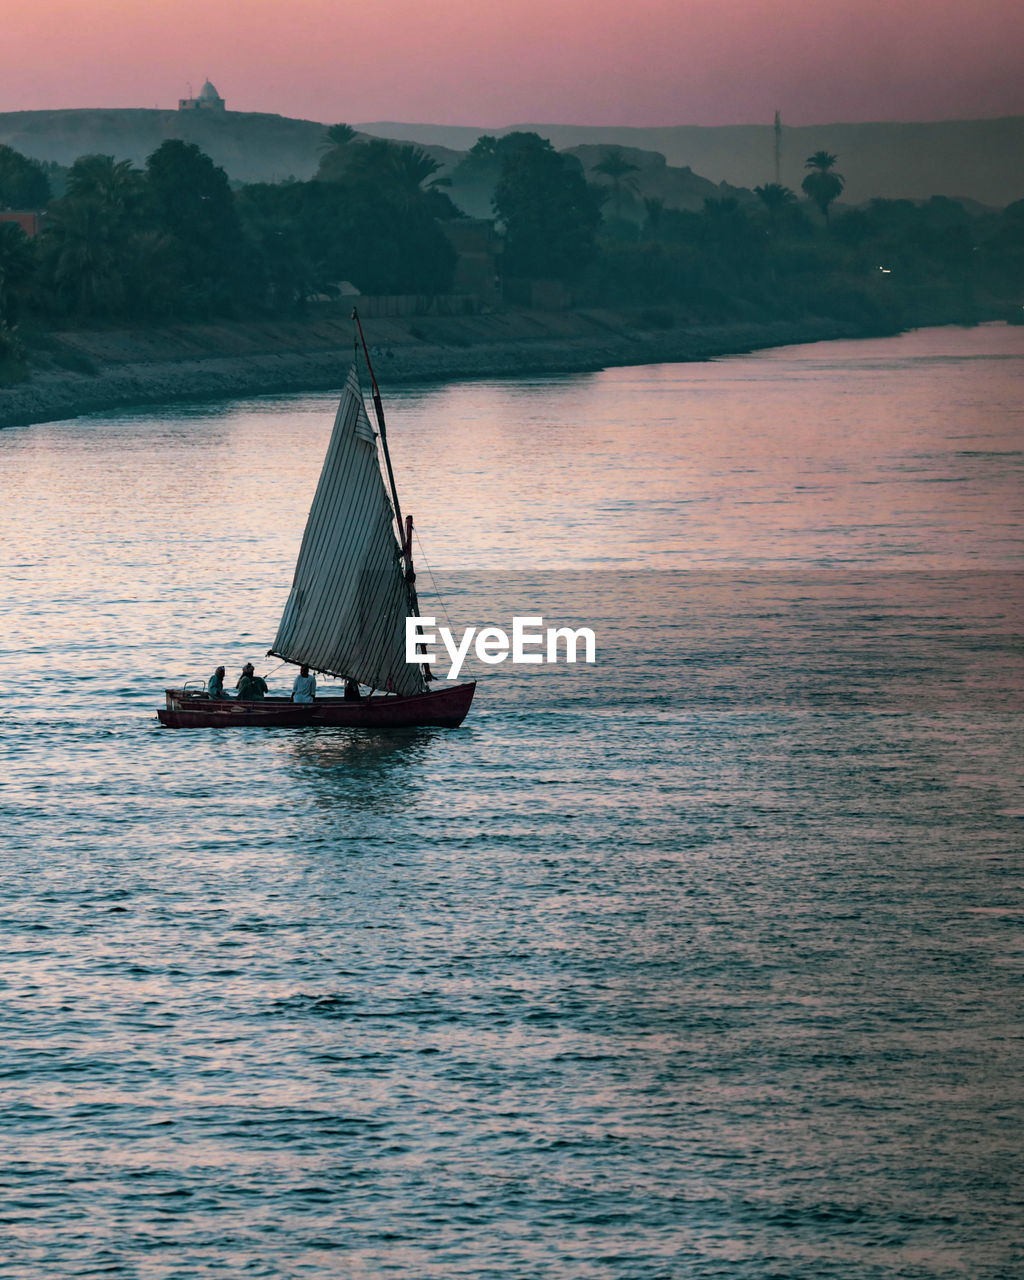 Sailing on the river nile